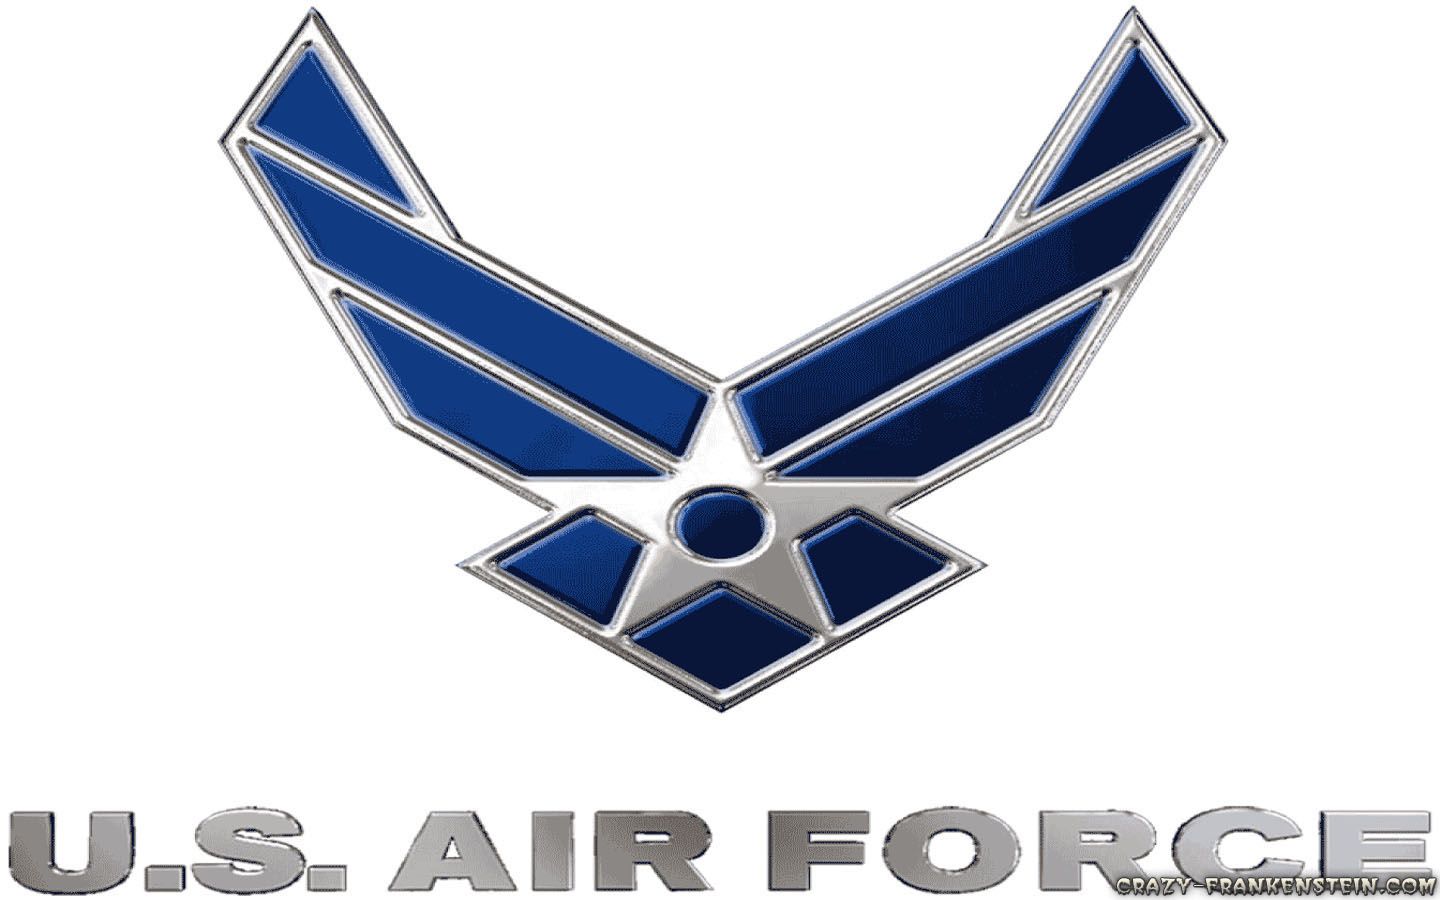 United States Air Force Wallpaper